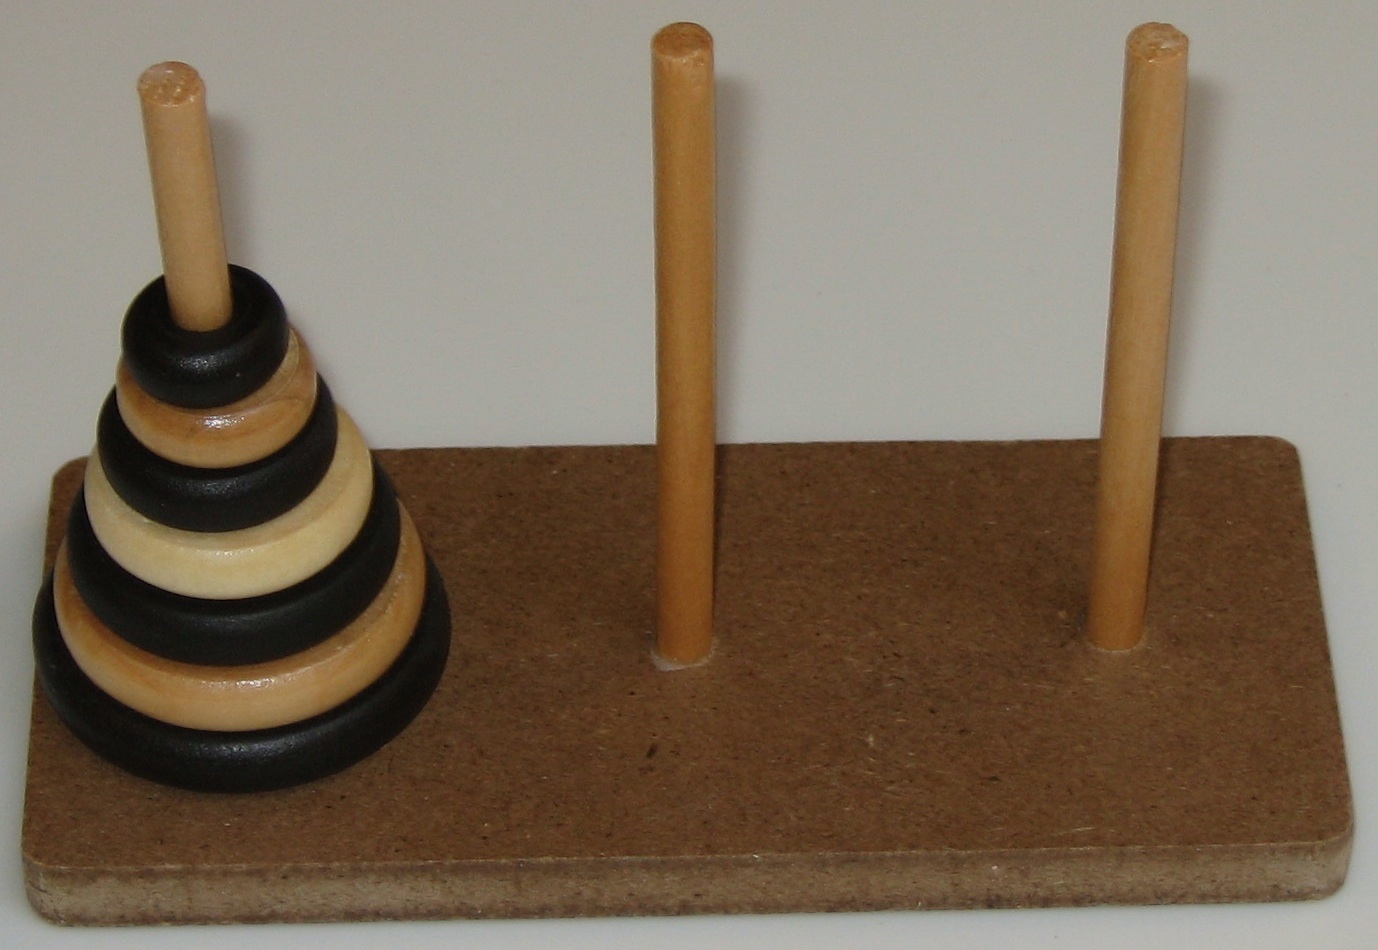 What is the “Tower of Hanoi?”